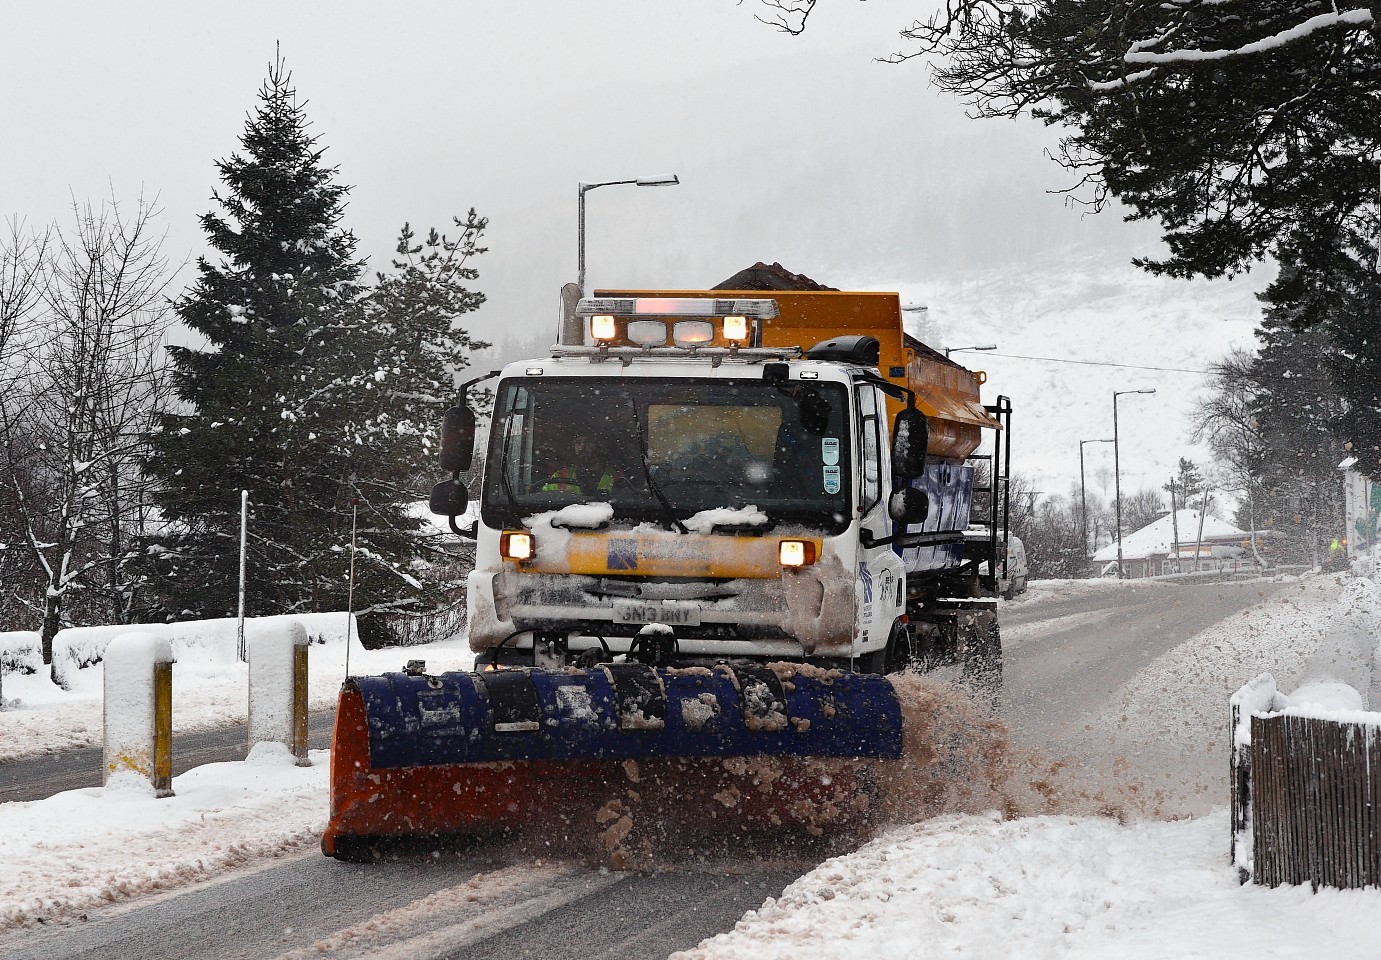 Snowploughs have been out in force, including this one in Tyndrum